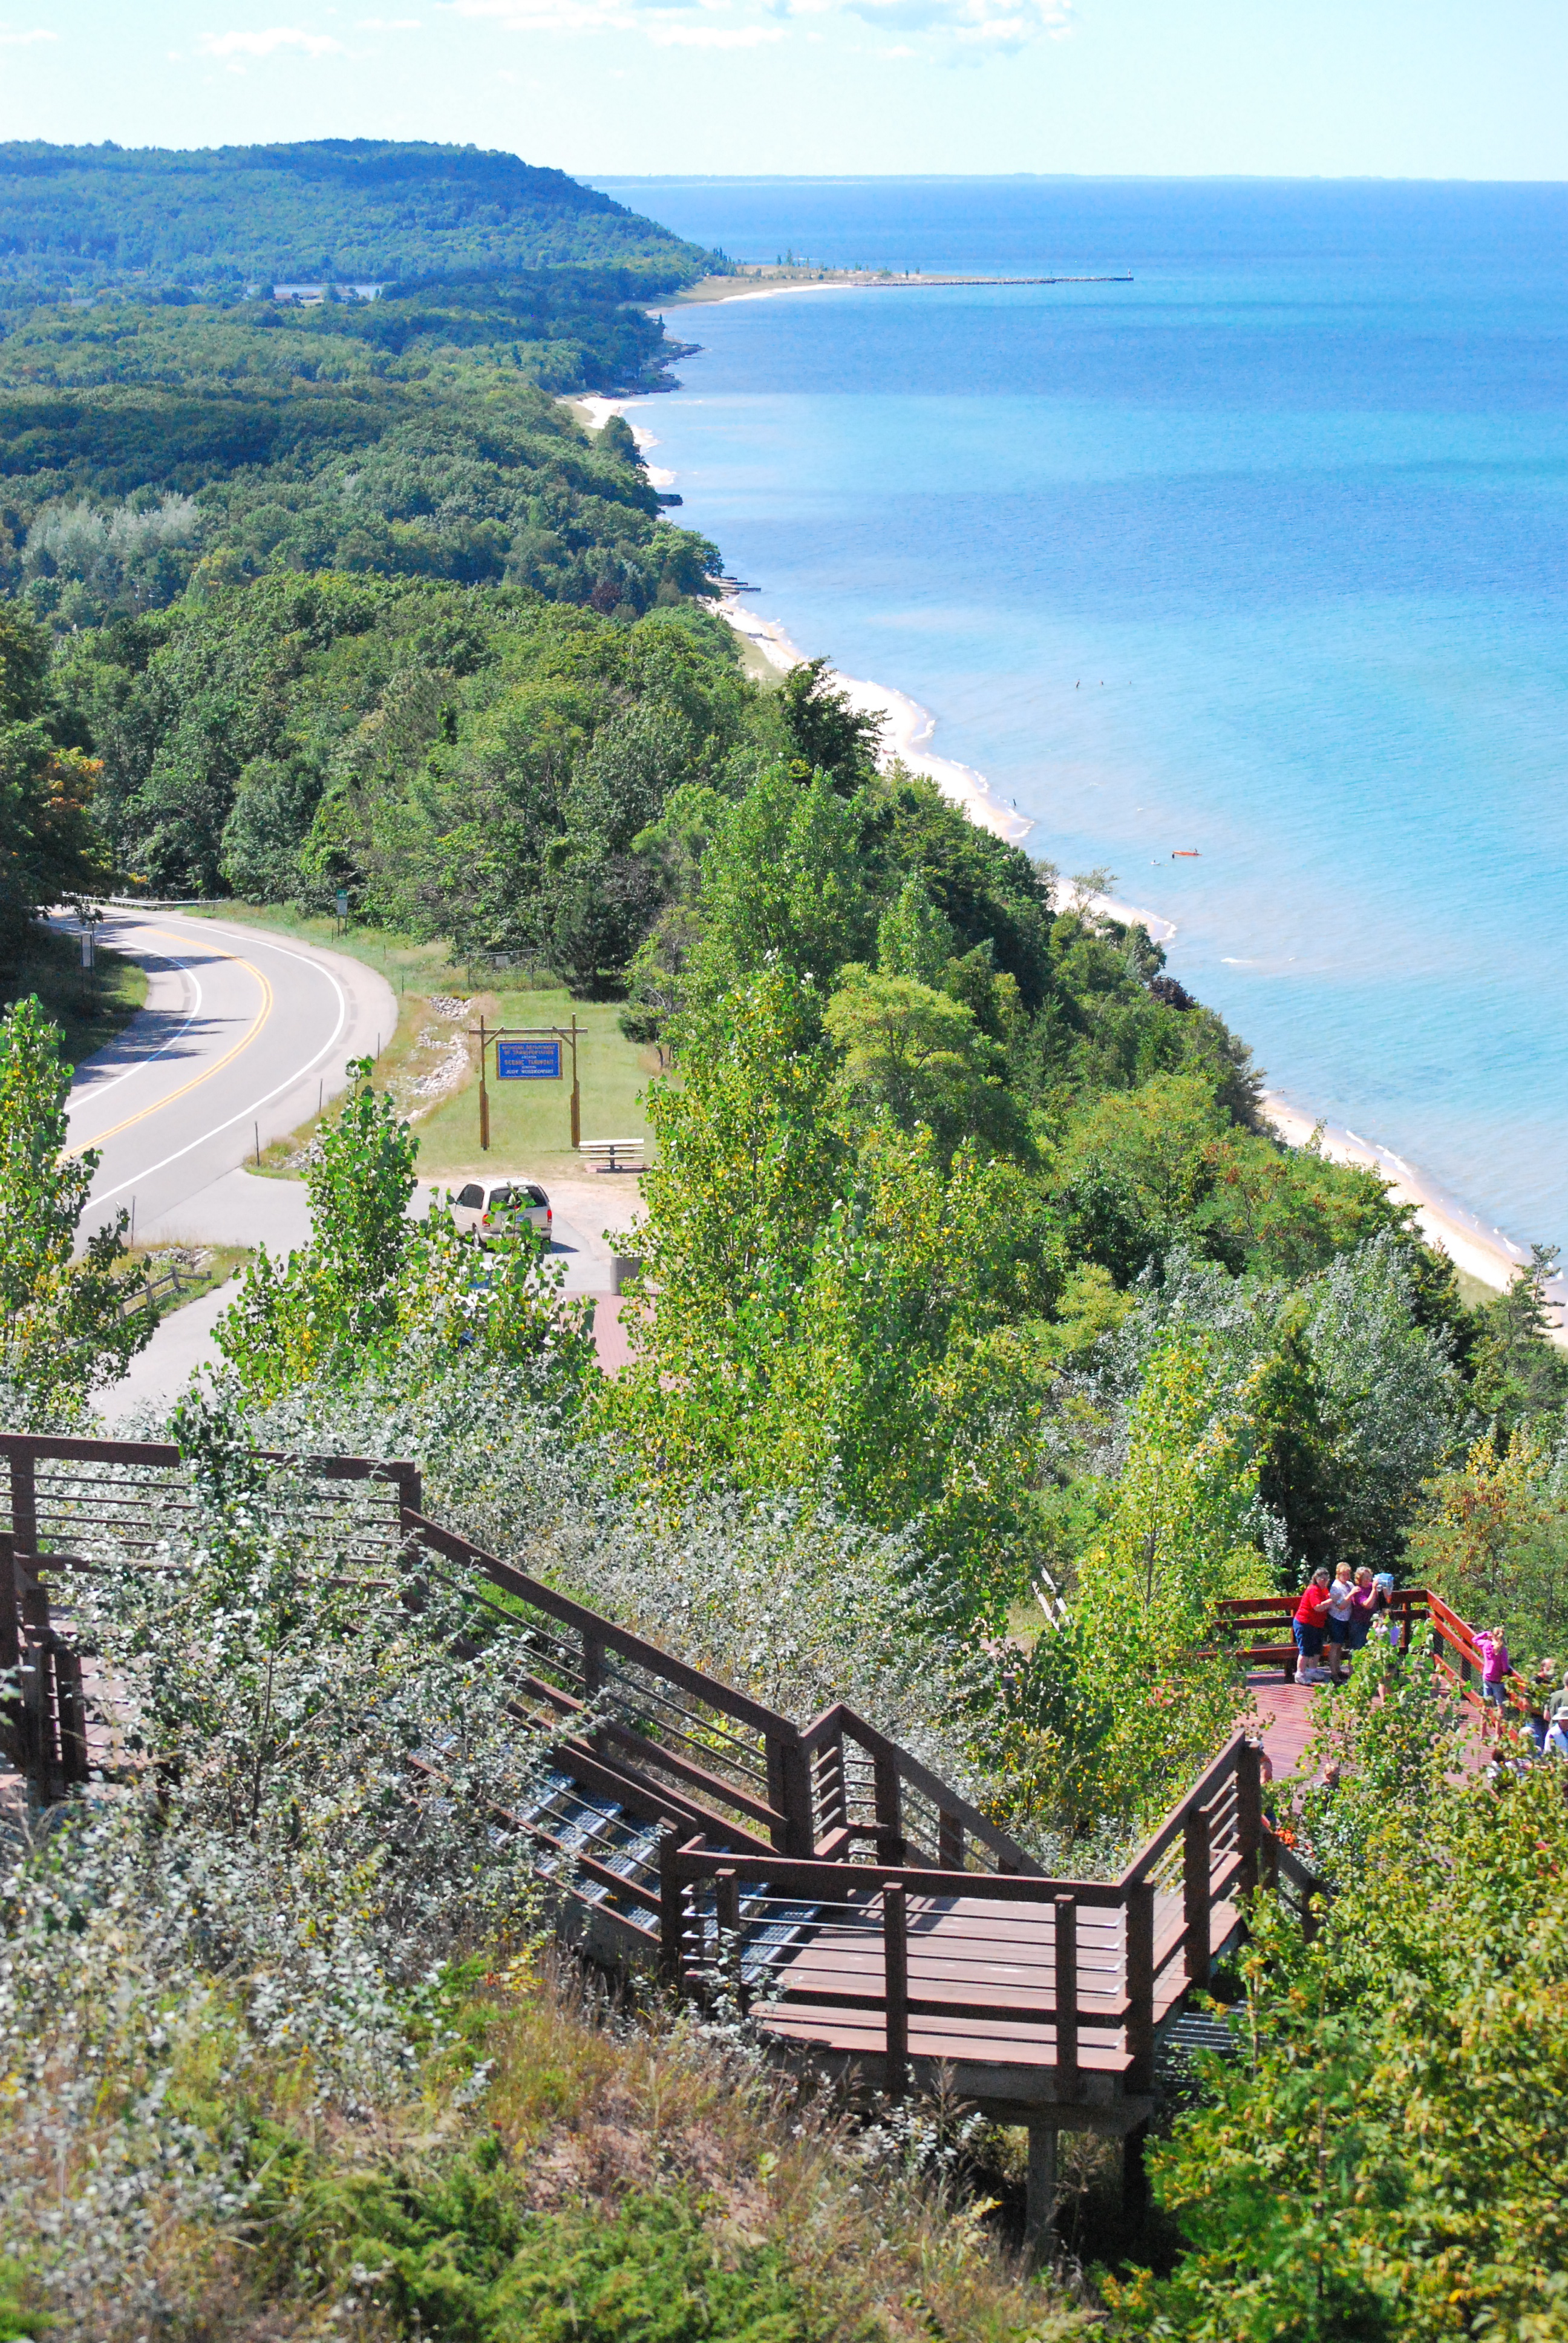 Inspiration Point - Arcadia Scenic Outlook, Michigan